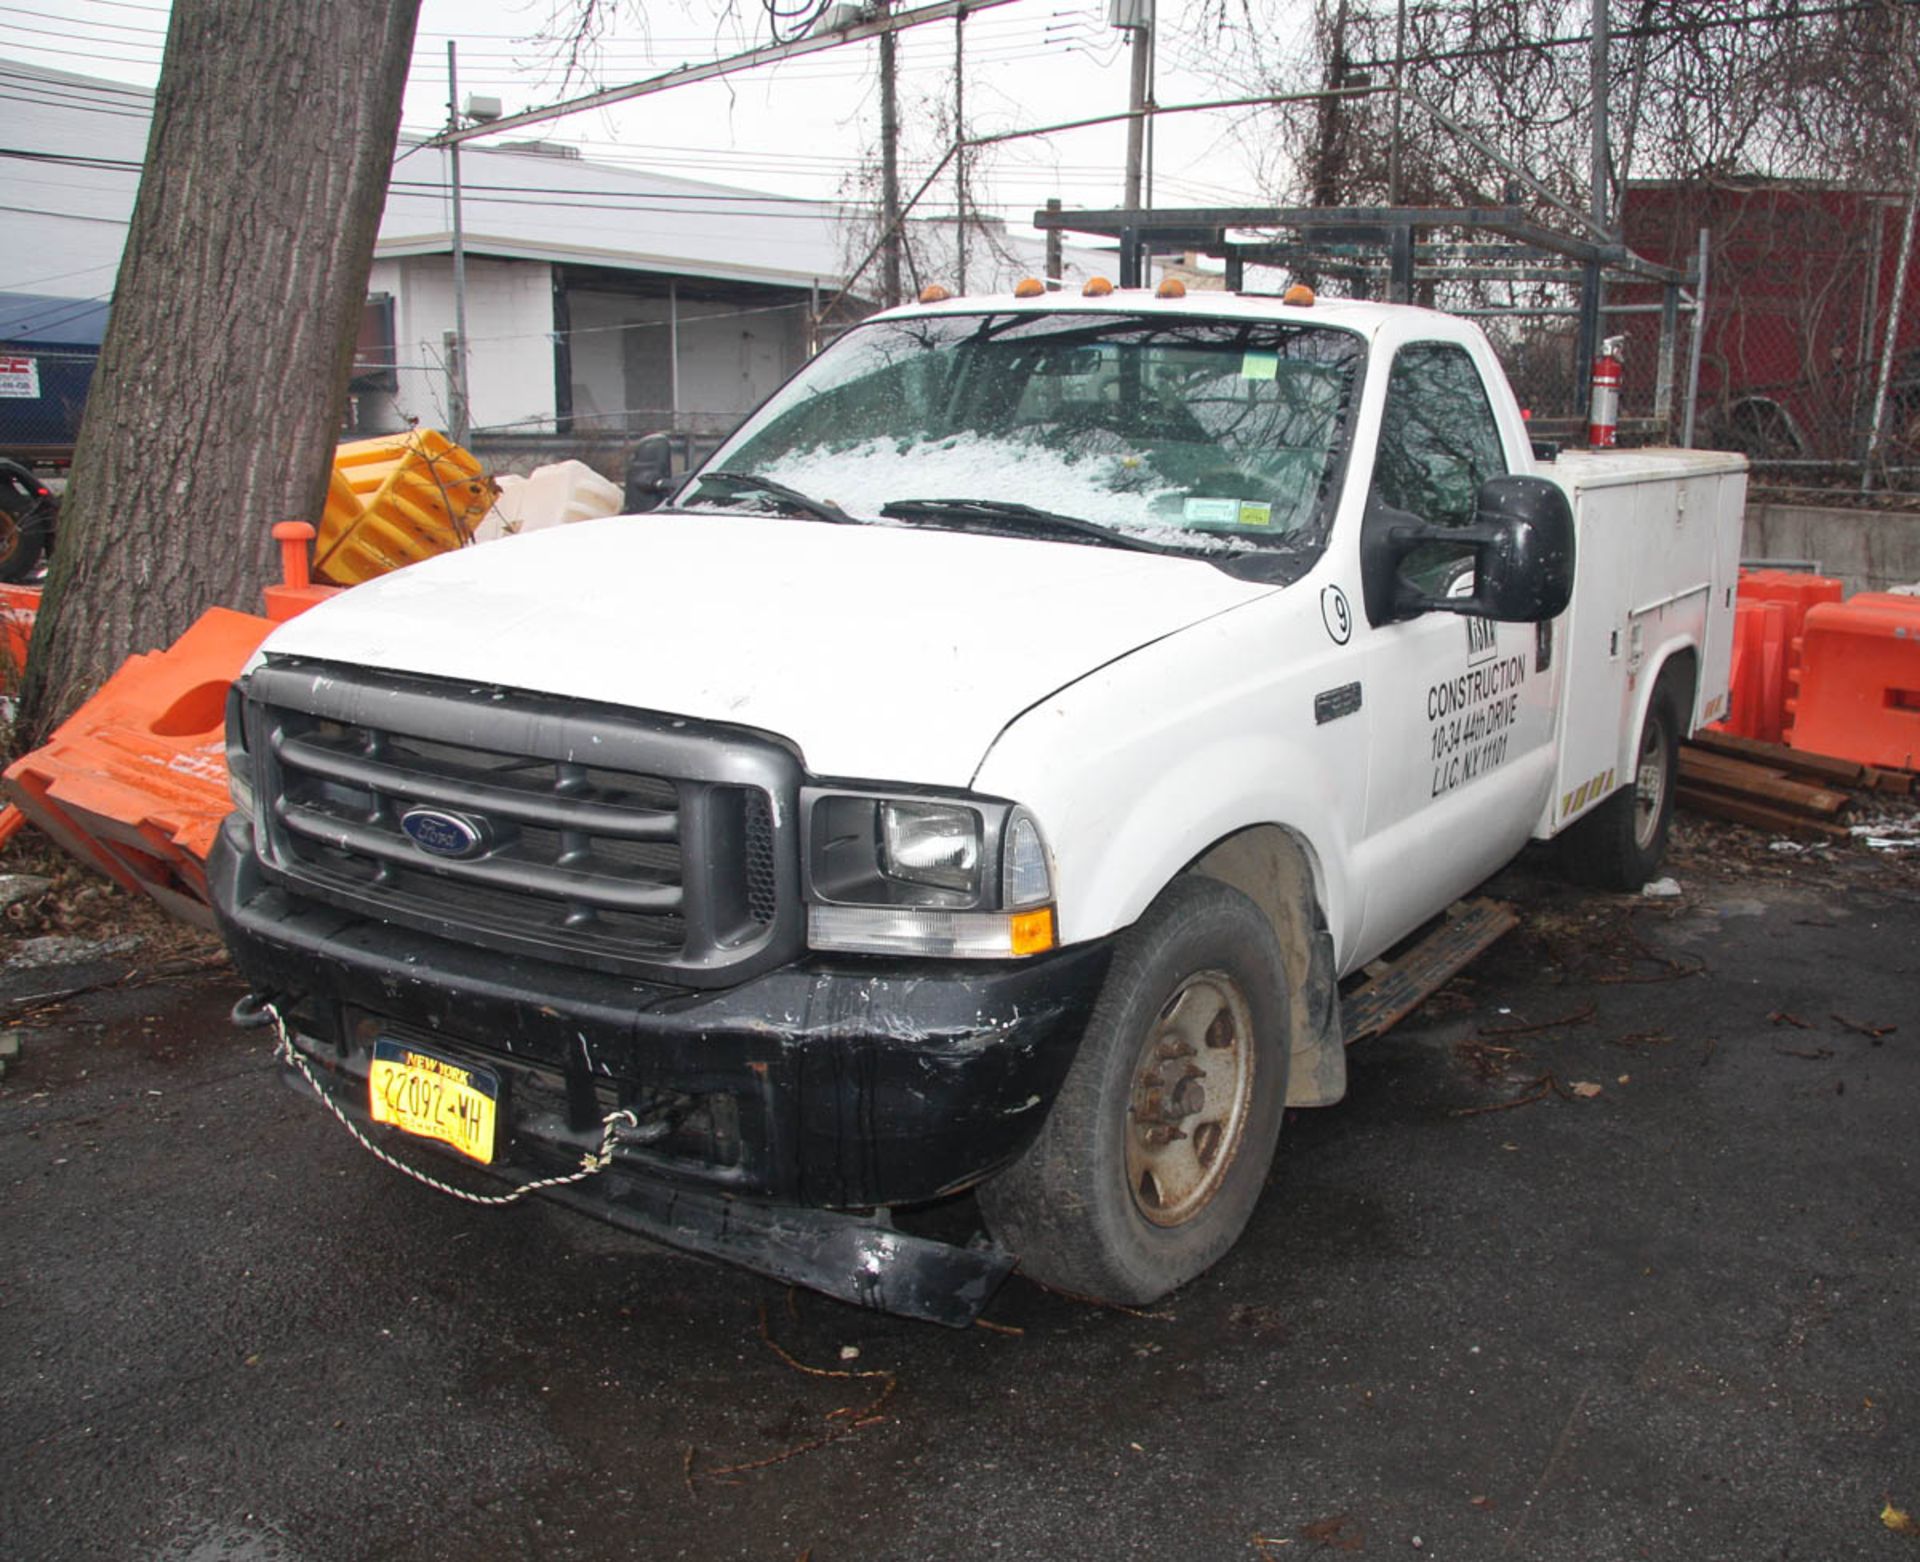 2002 FORD F-350 XL SUPER DUTY UTILITY TRUCK, AUTOMATIC, WITH 68,921 APPROXIMATE MILES, TRITON 5.